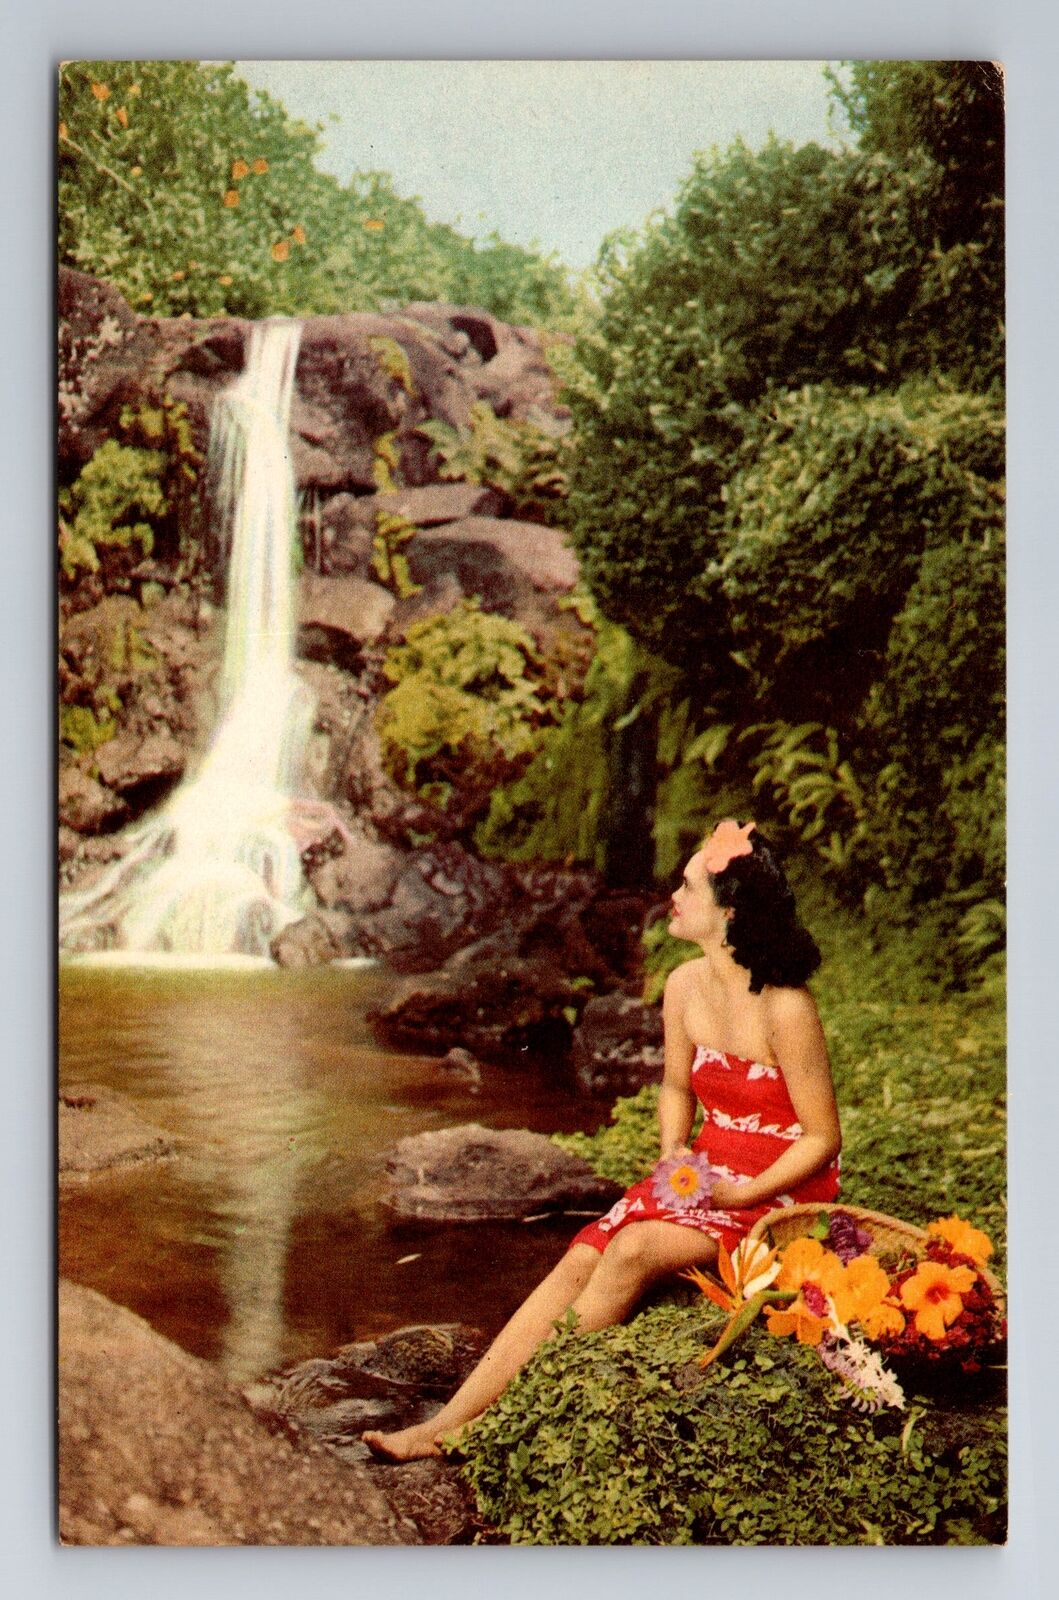 Island Girl Beauty By A Waterfall In Hawaii Antique, Vintage Postcard